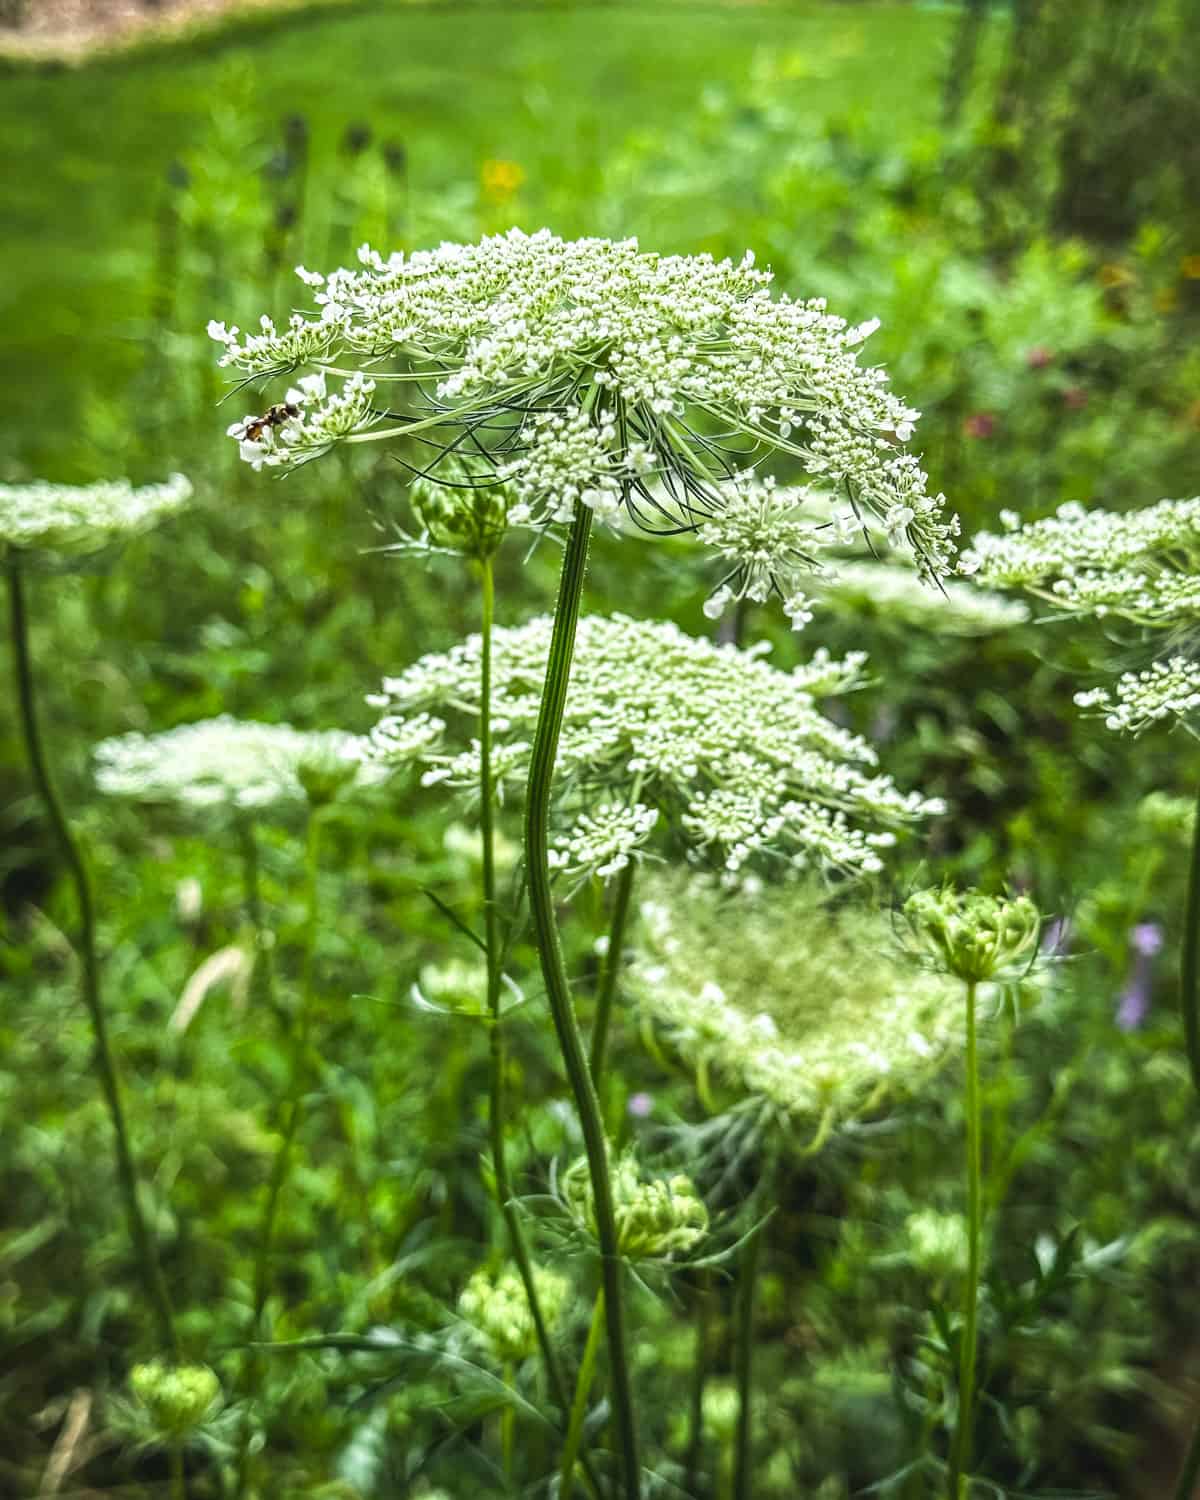 How to Grow and Care for Queen Anne's Lace